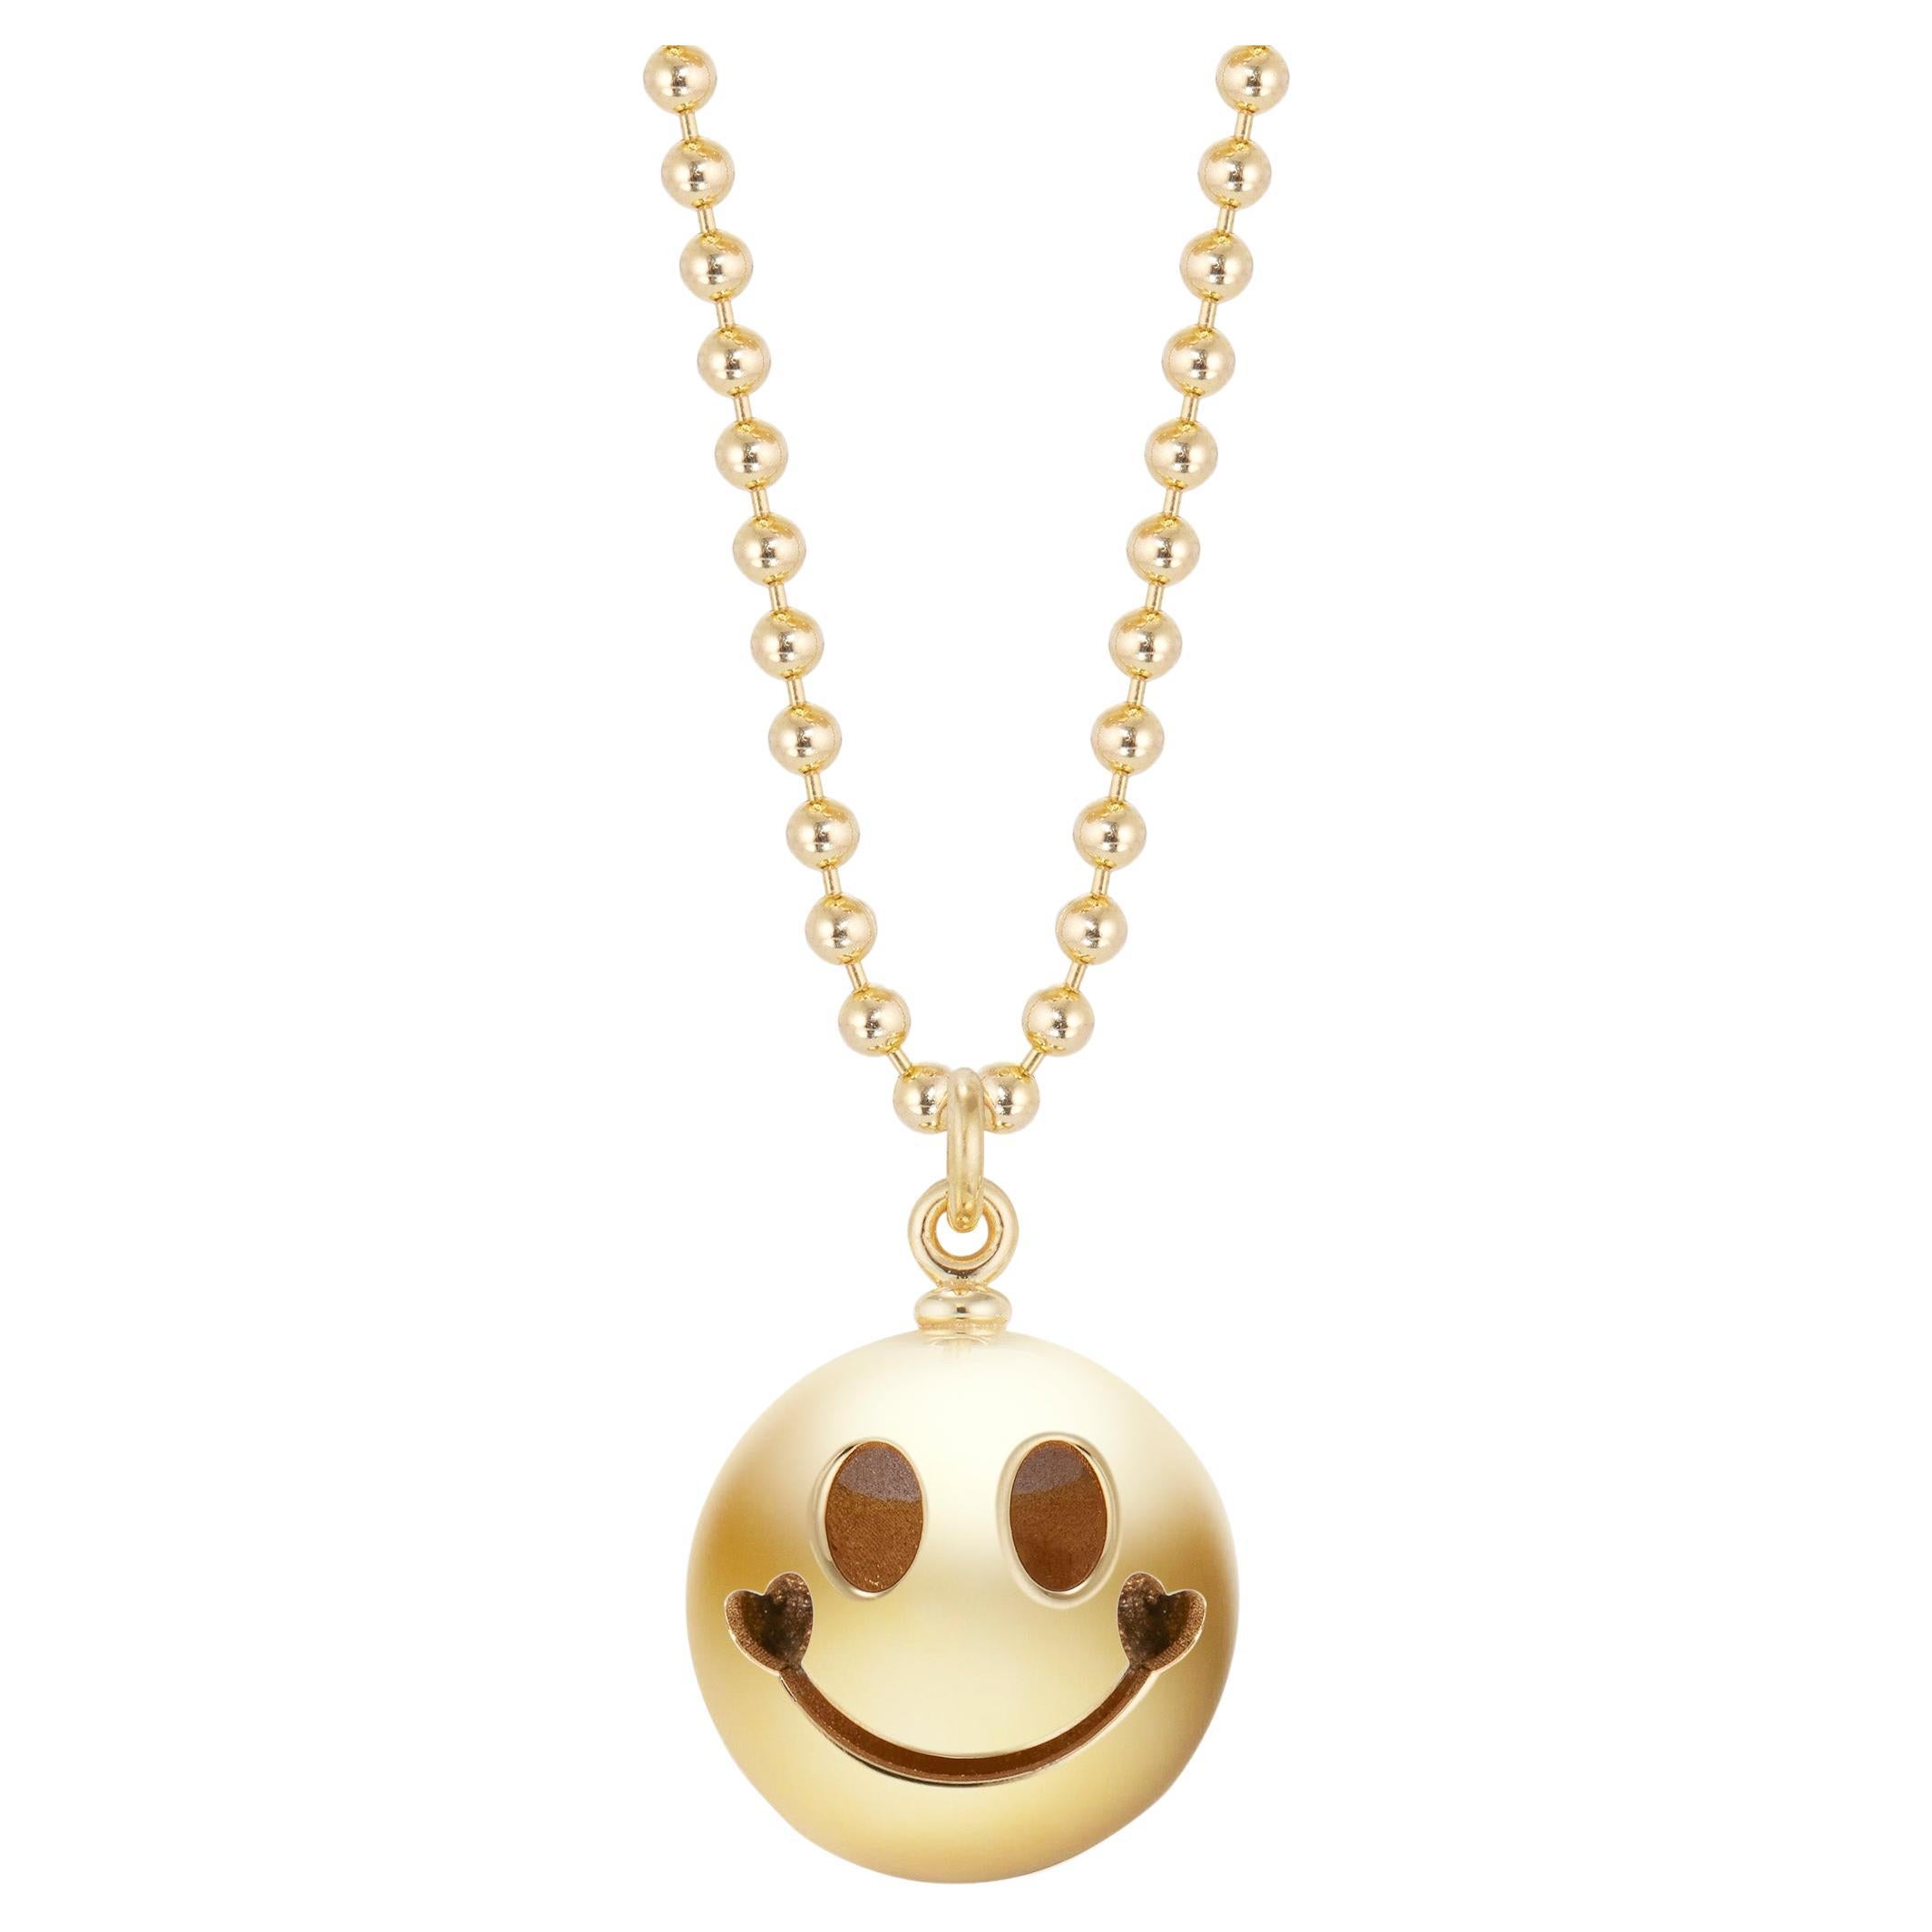 Zoma Design 14K Yellow Gold Smiley Heart Pendant Necklace For Sale